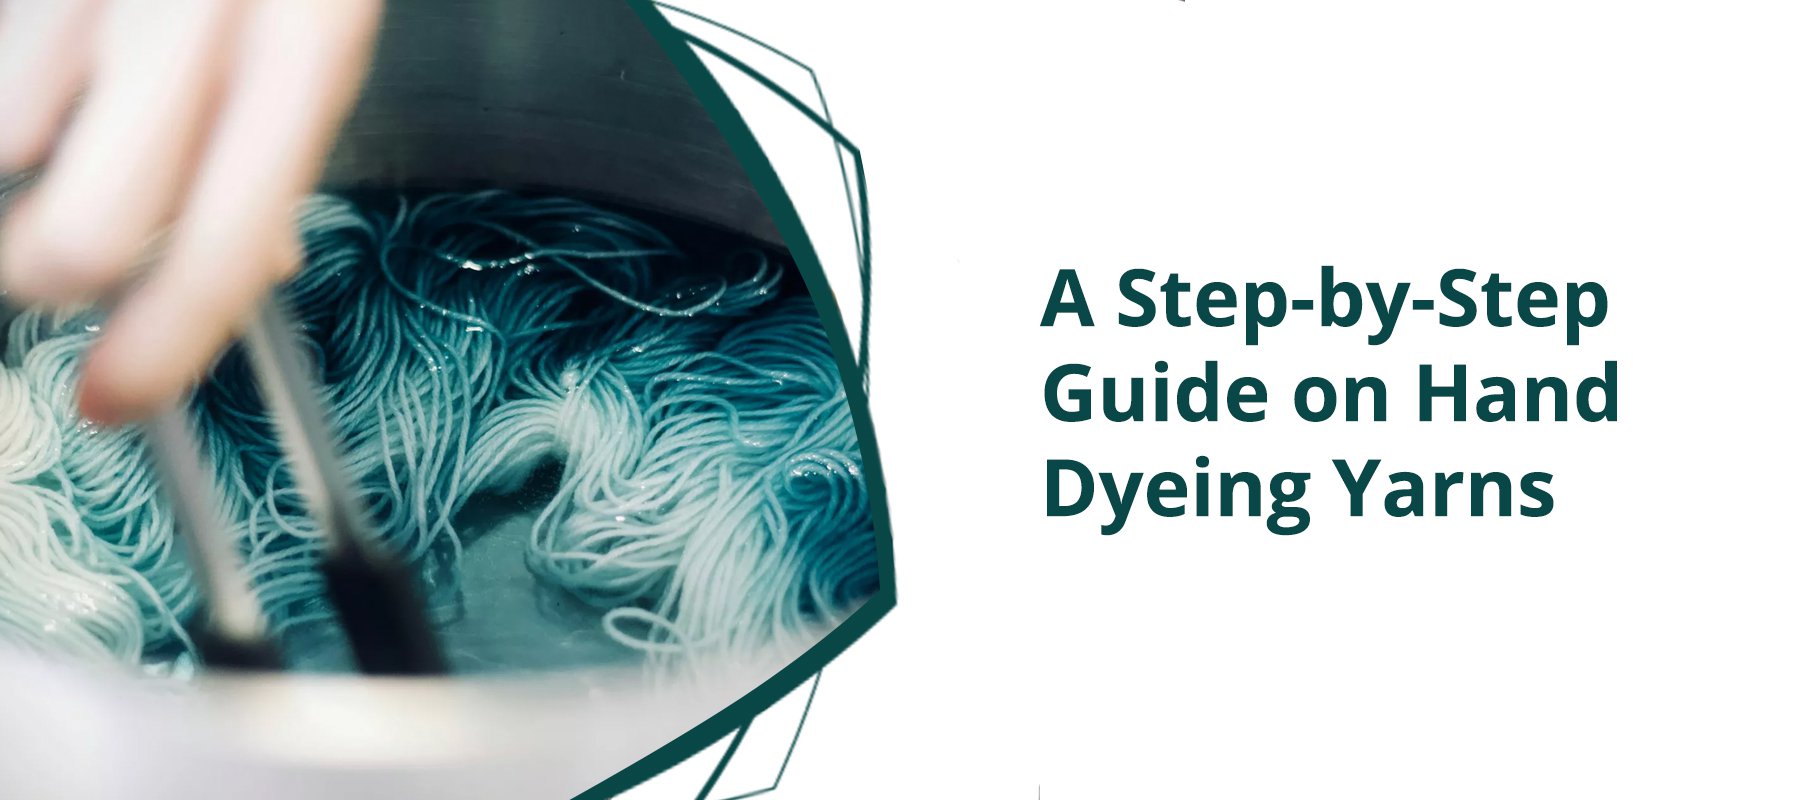 A Step-by-Step Guide on Hand-Dyeing Yarns